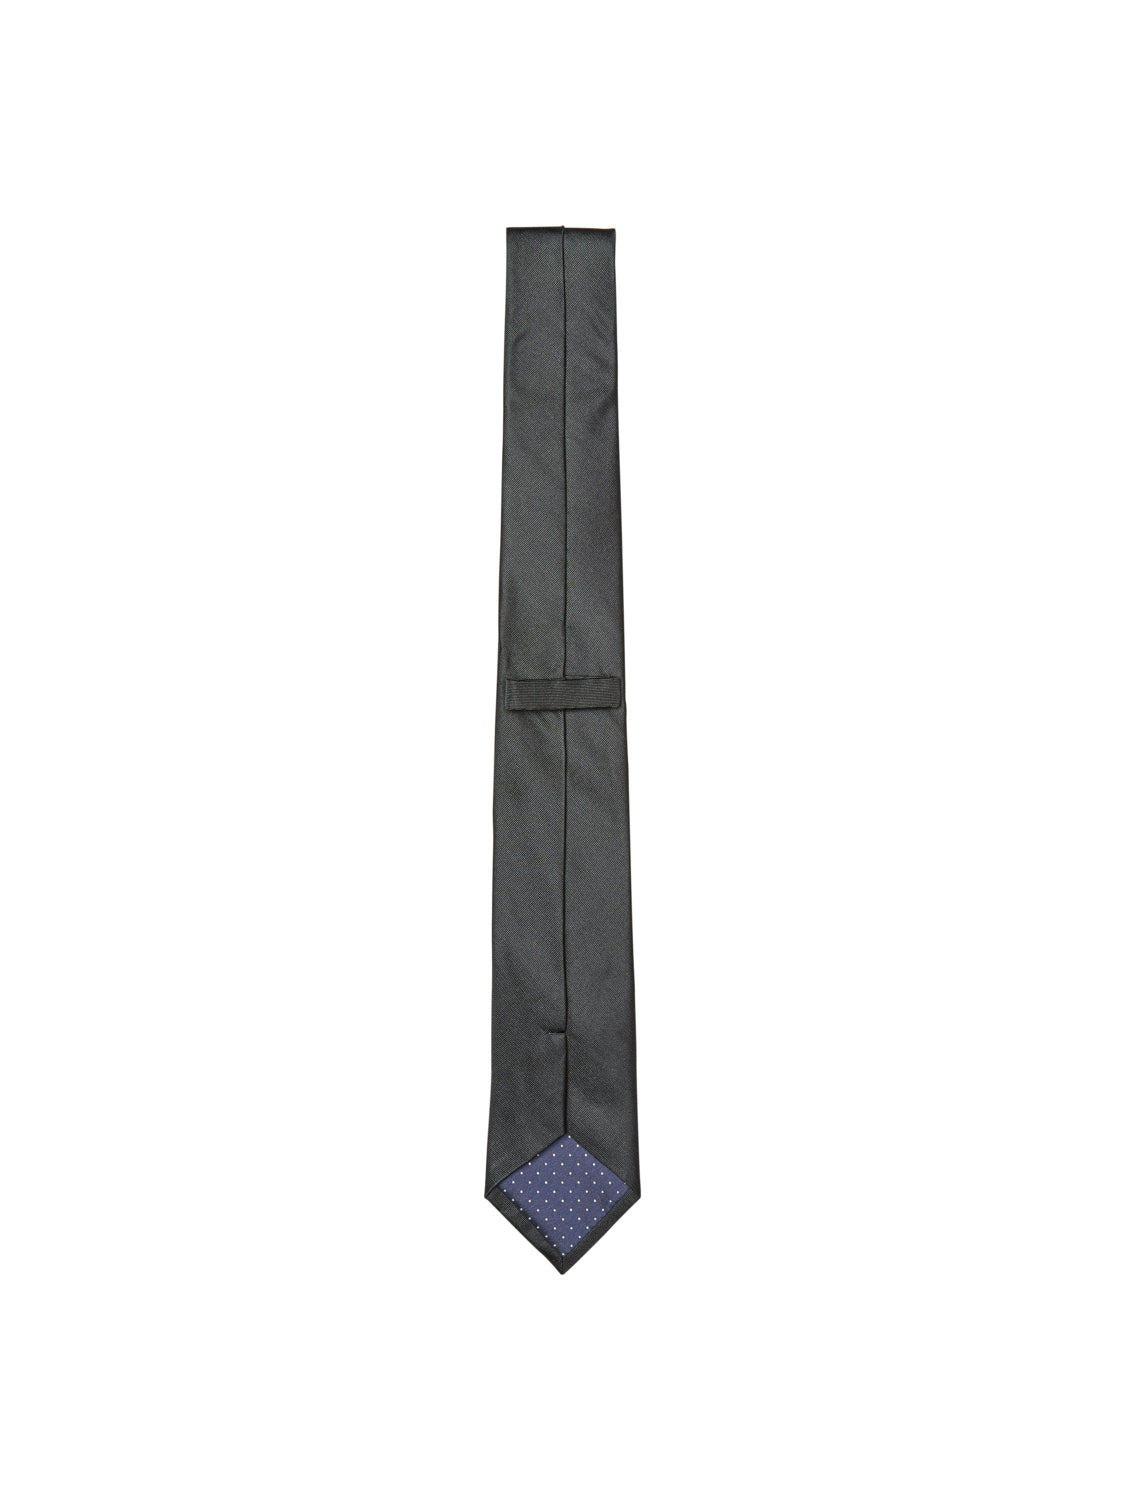 SELECTED HOMME - NEW Tie - Black